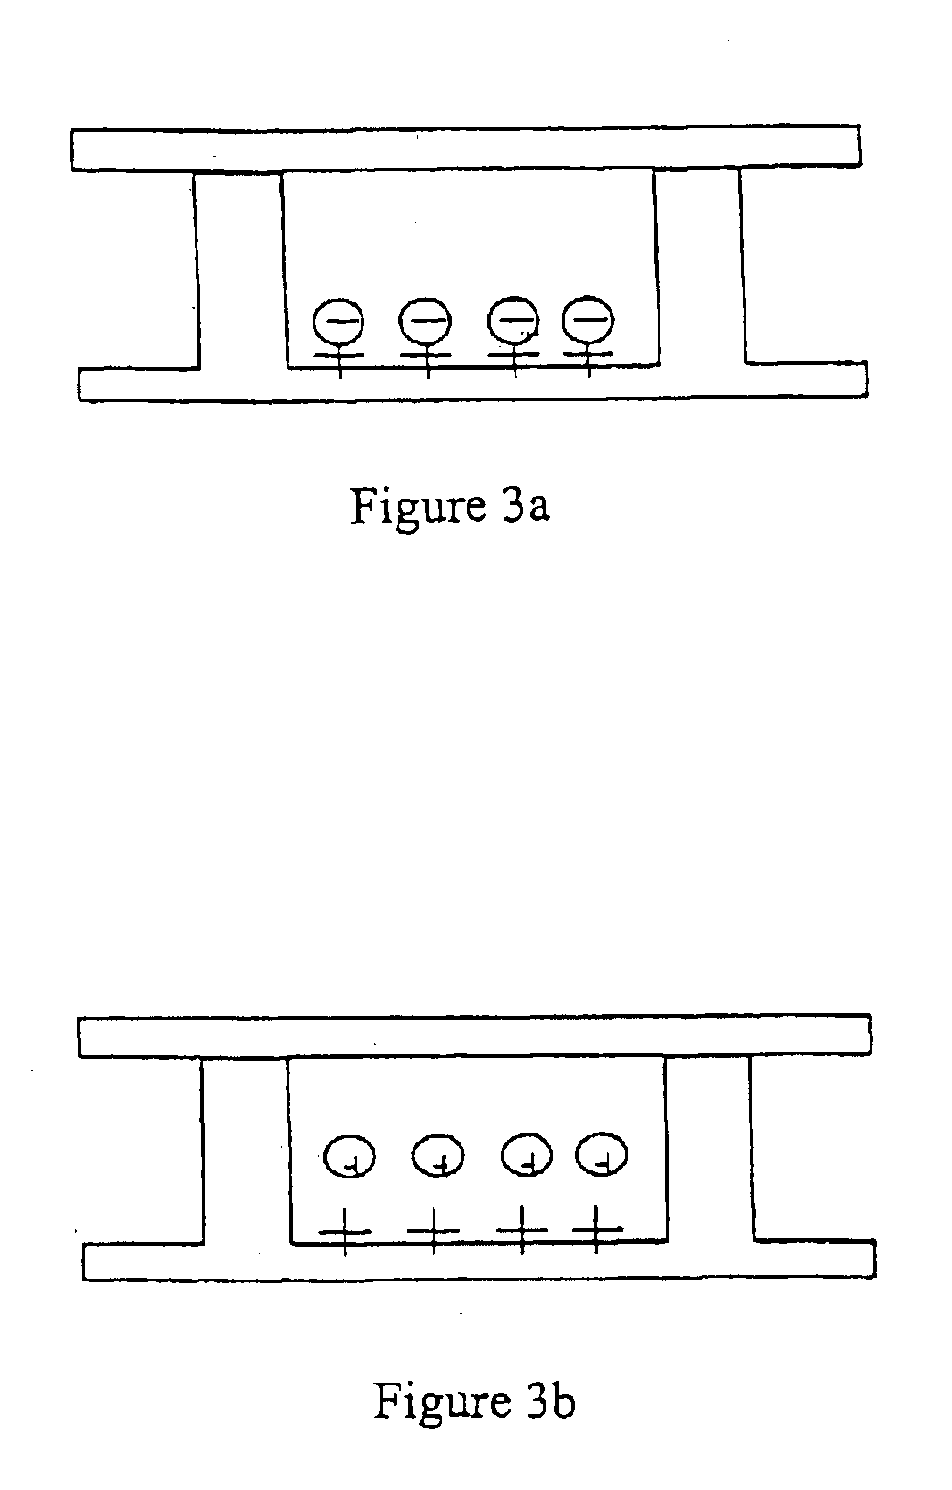 Methods of surface modification for improving electrophoretic display performance